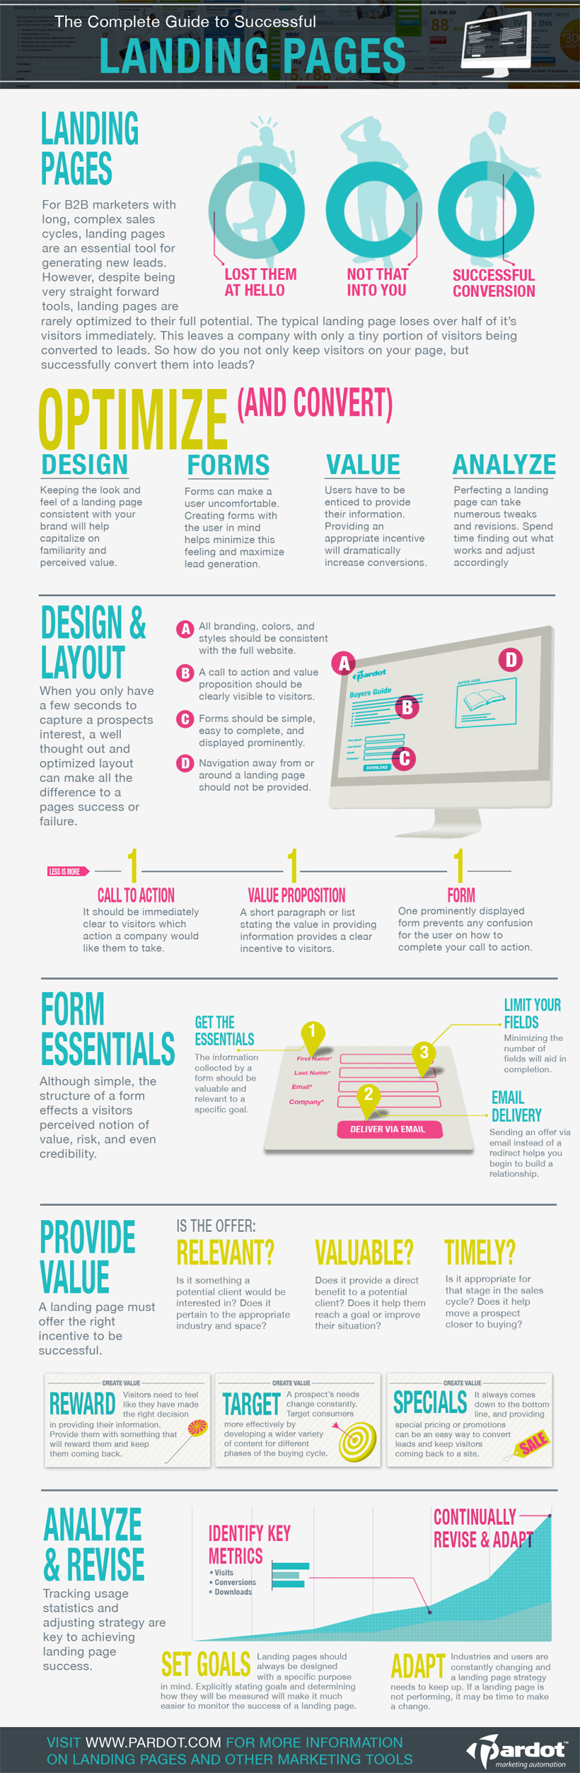 20 Useful Infographics Featuring Web Deisgn Tips & Tricks